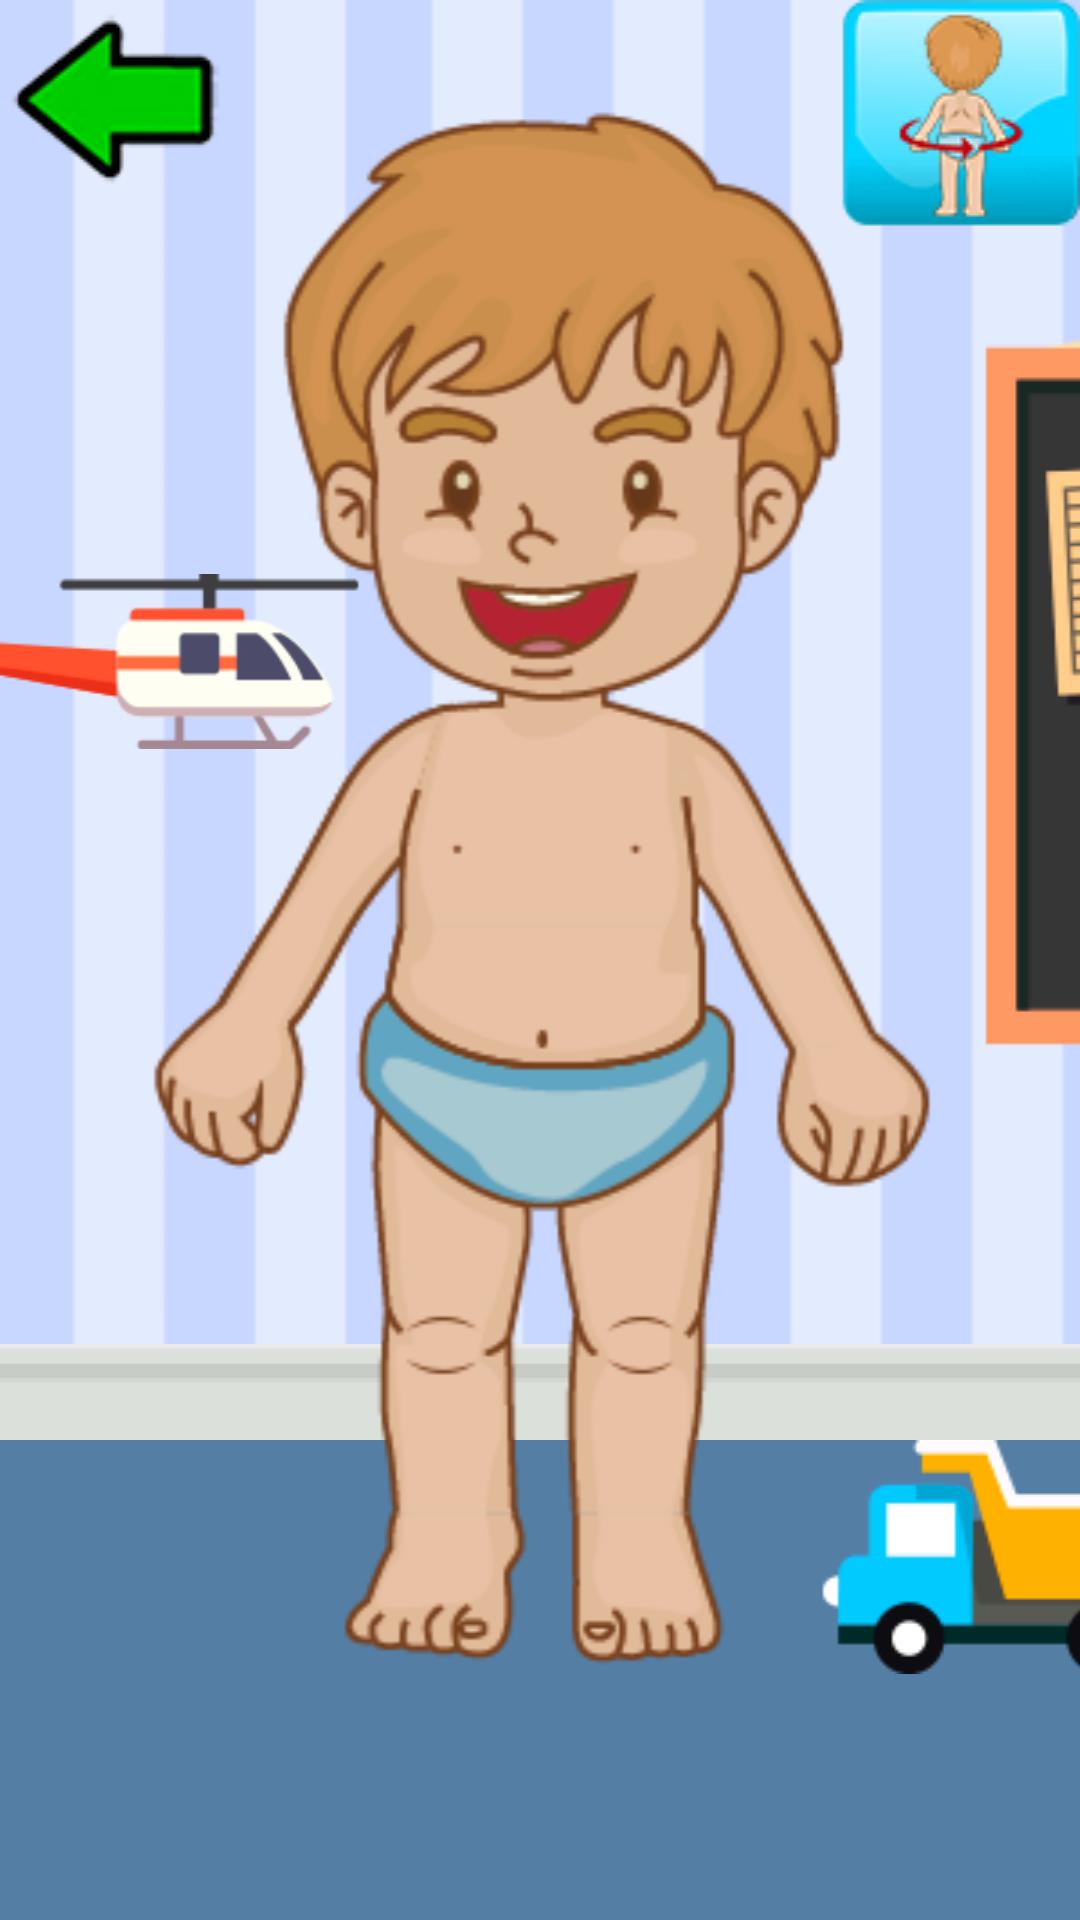 Body Parts for Kids pch_1.2.25 Screenshot 13